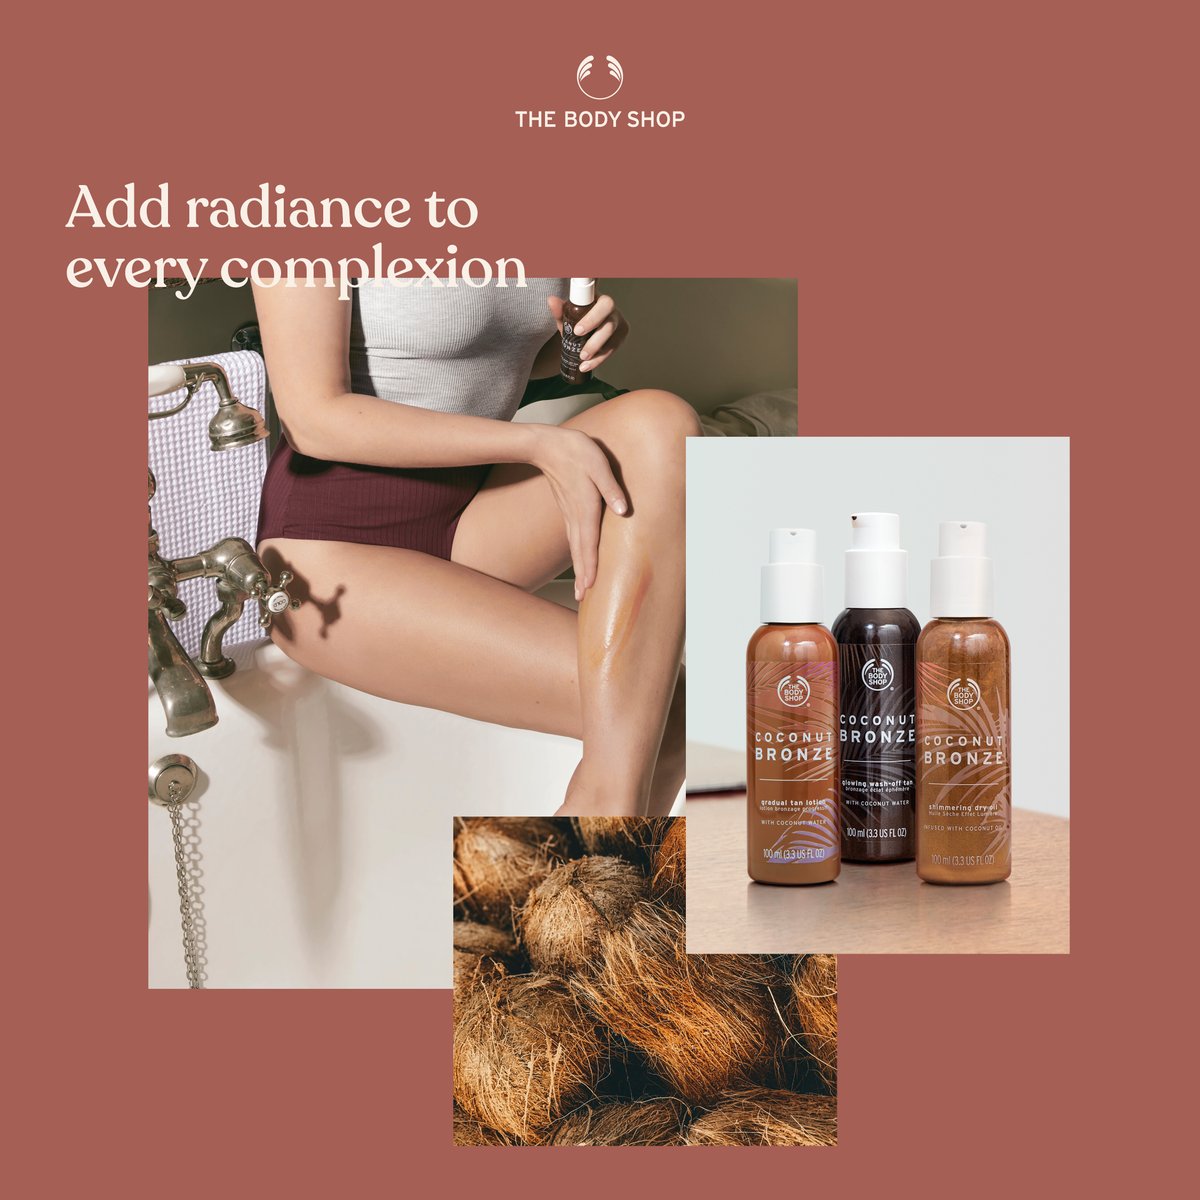 After a streak-free, non-sticky tan?
The search is over! Visit my website and get your order in today!
consultant.thebodyshop.com/en-au/myshop/e… 
#TheBodyShopCoconutBronze #Beauty #Makeup #NaturalMakeupLook